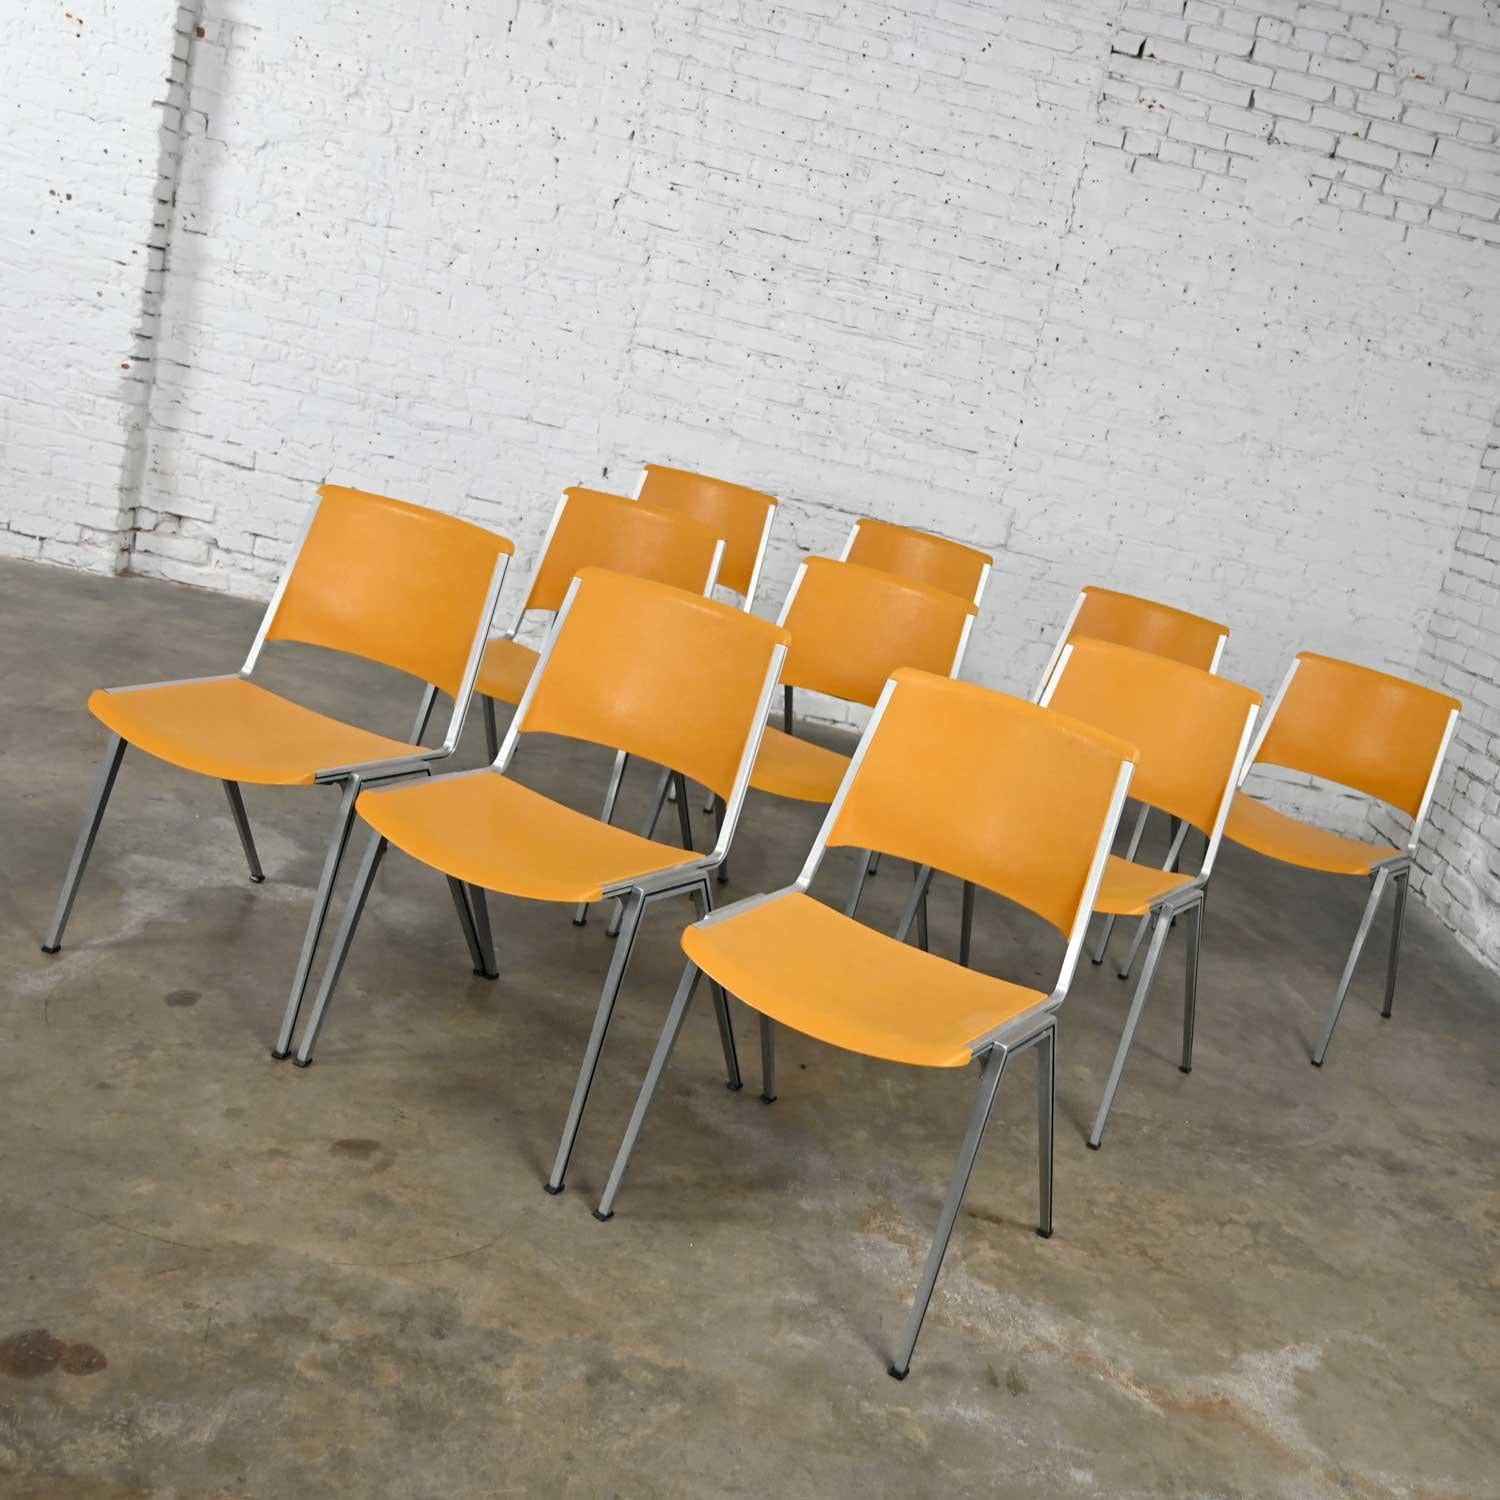 Outstanding vintage Steelcase stacking chairs model #1278 yellow gold or sunflower yellow plastic Great Mid-century modern industrial look. Comprised of extruded aluminum frames and gold molded plastic seat and backs. Beautiful condition, keeping in